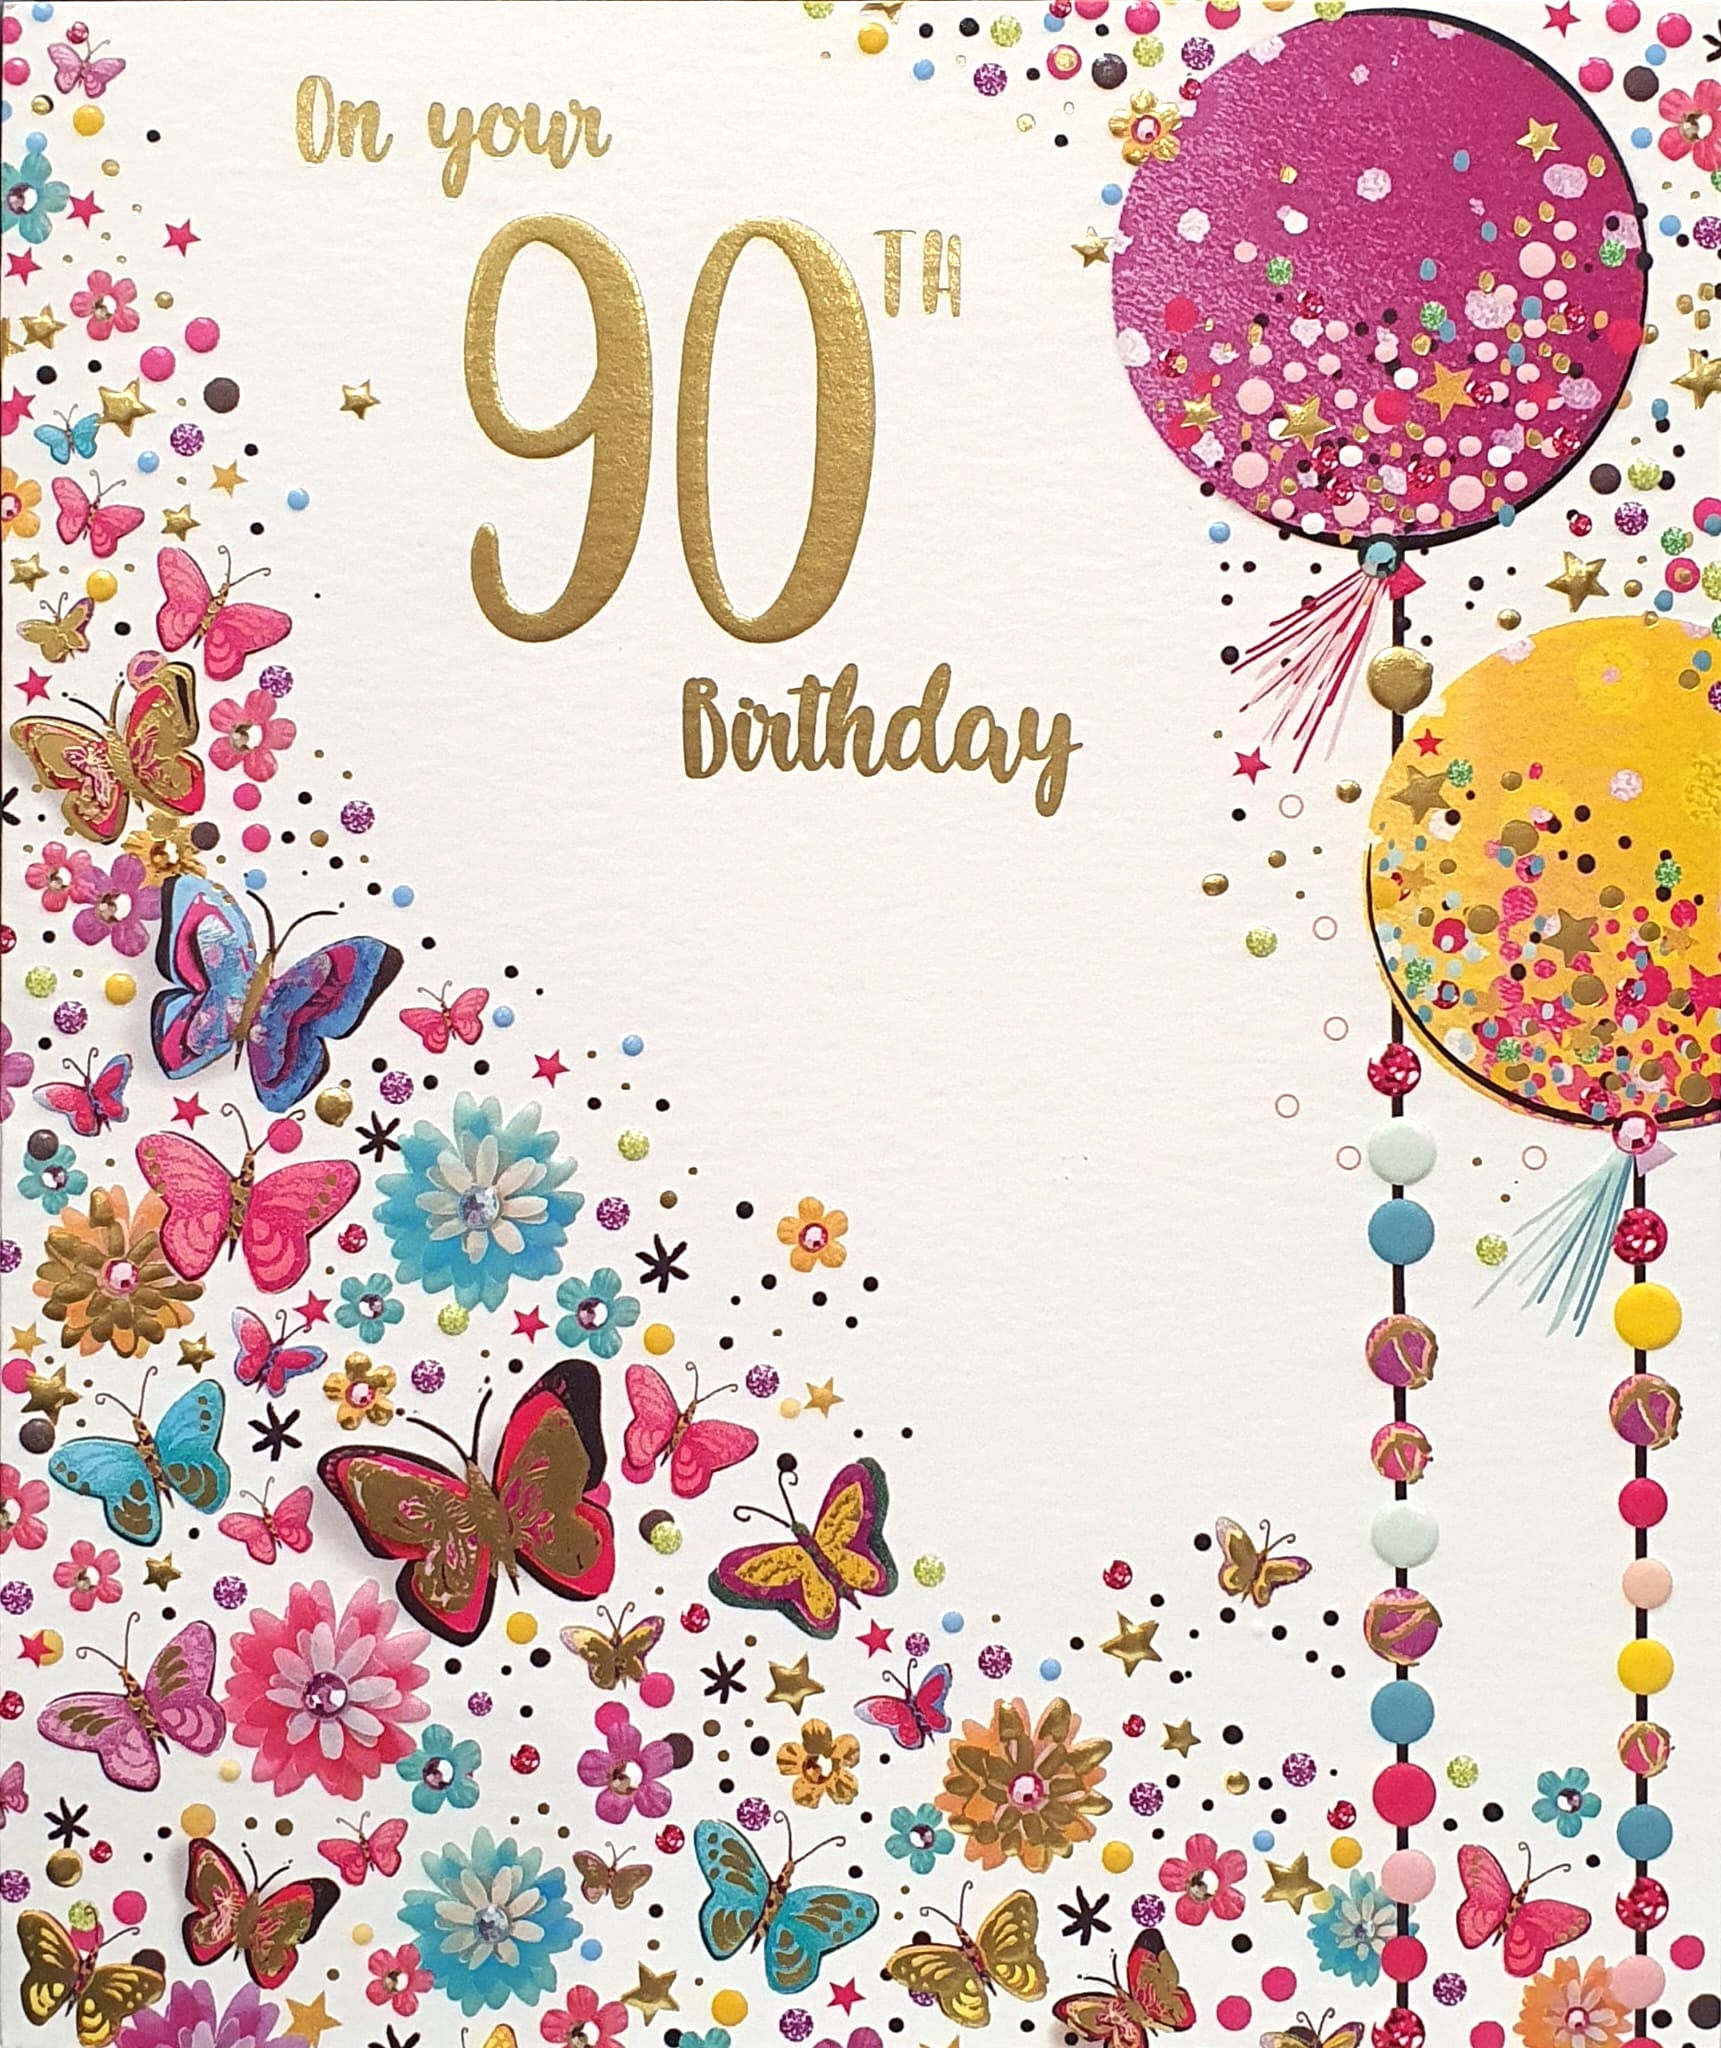 90th Birthday Card - Kaleidoscope Of Colourful Butterflies